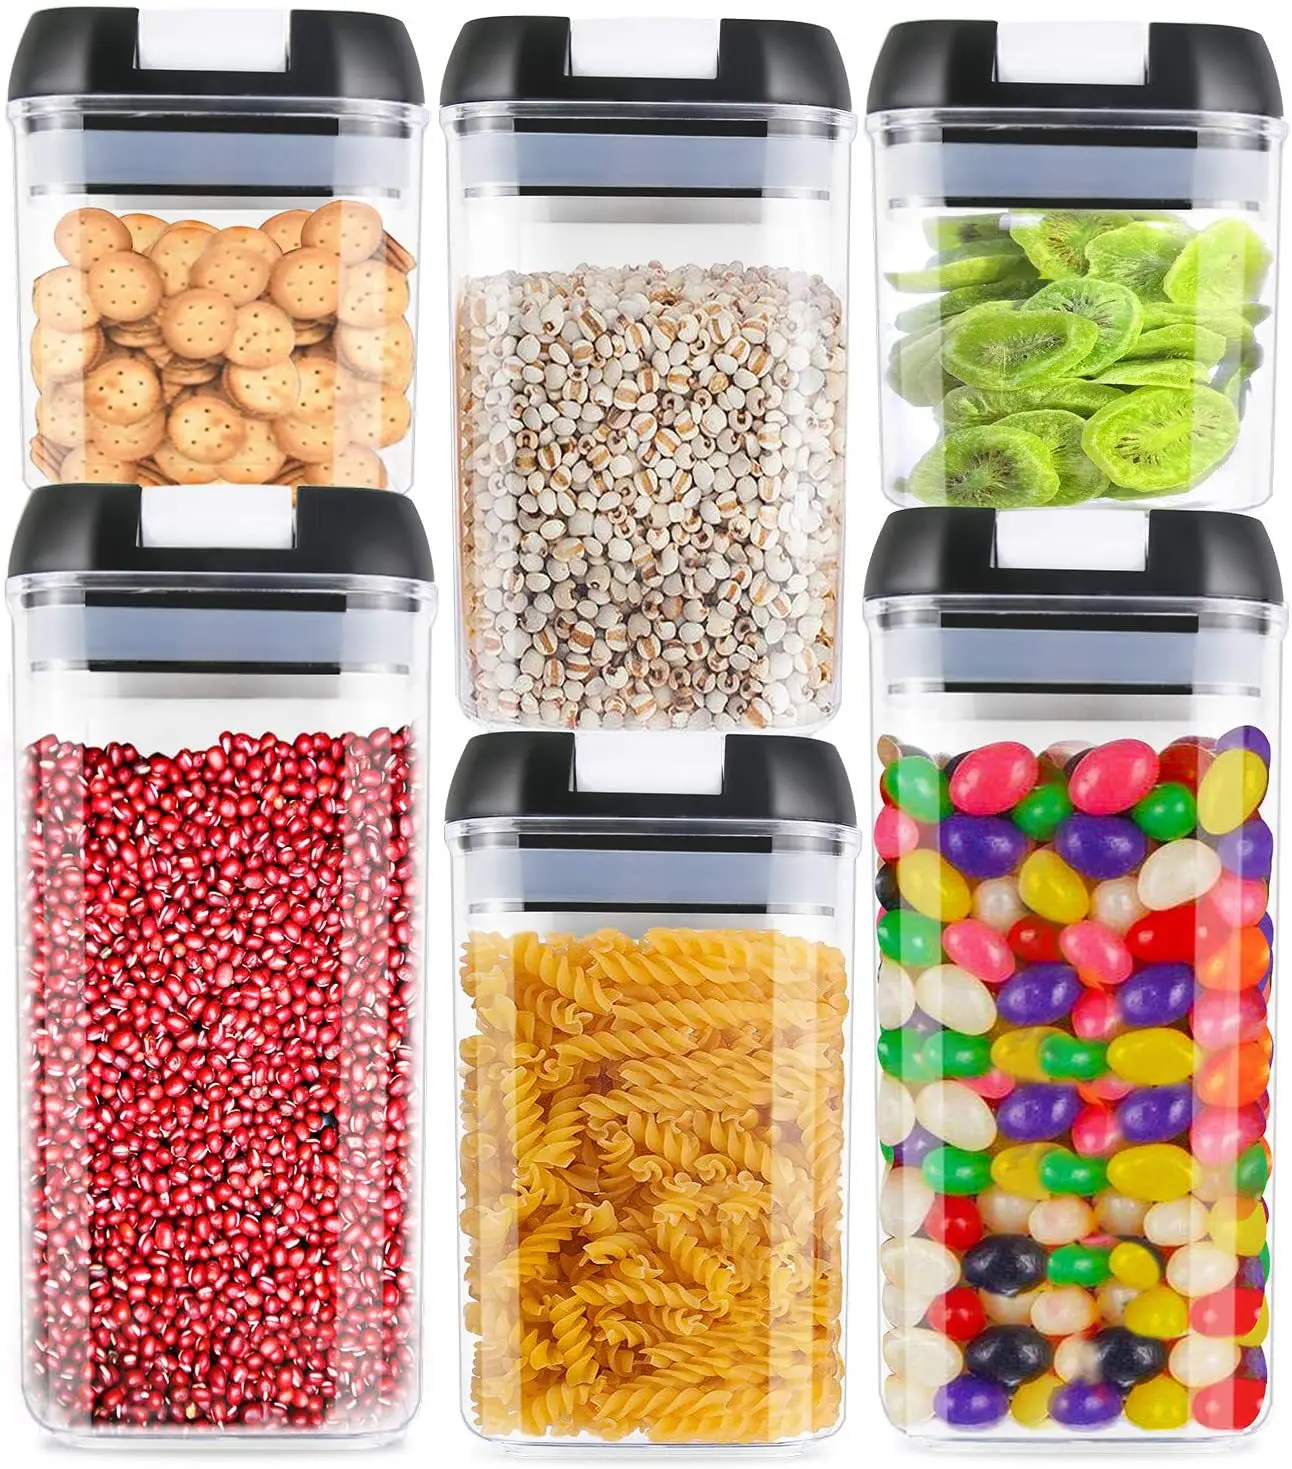 PRAKI Airtight Food Storage Containers Set with Lids - 24 PCS, BPA Free  Kitchen and Pantry Organization, Plastic Leak-proof Canisters for Cereal  Flour